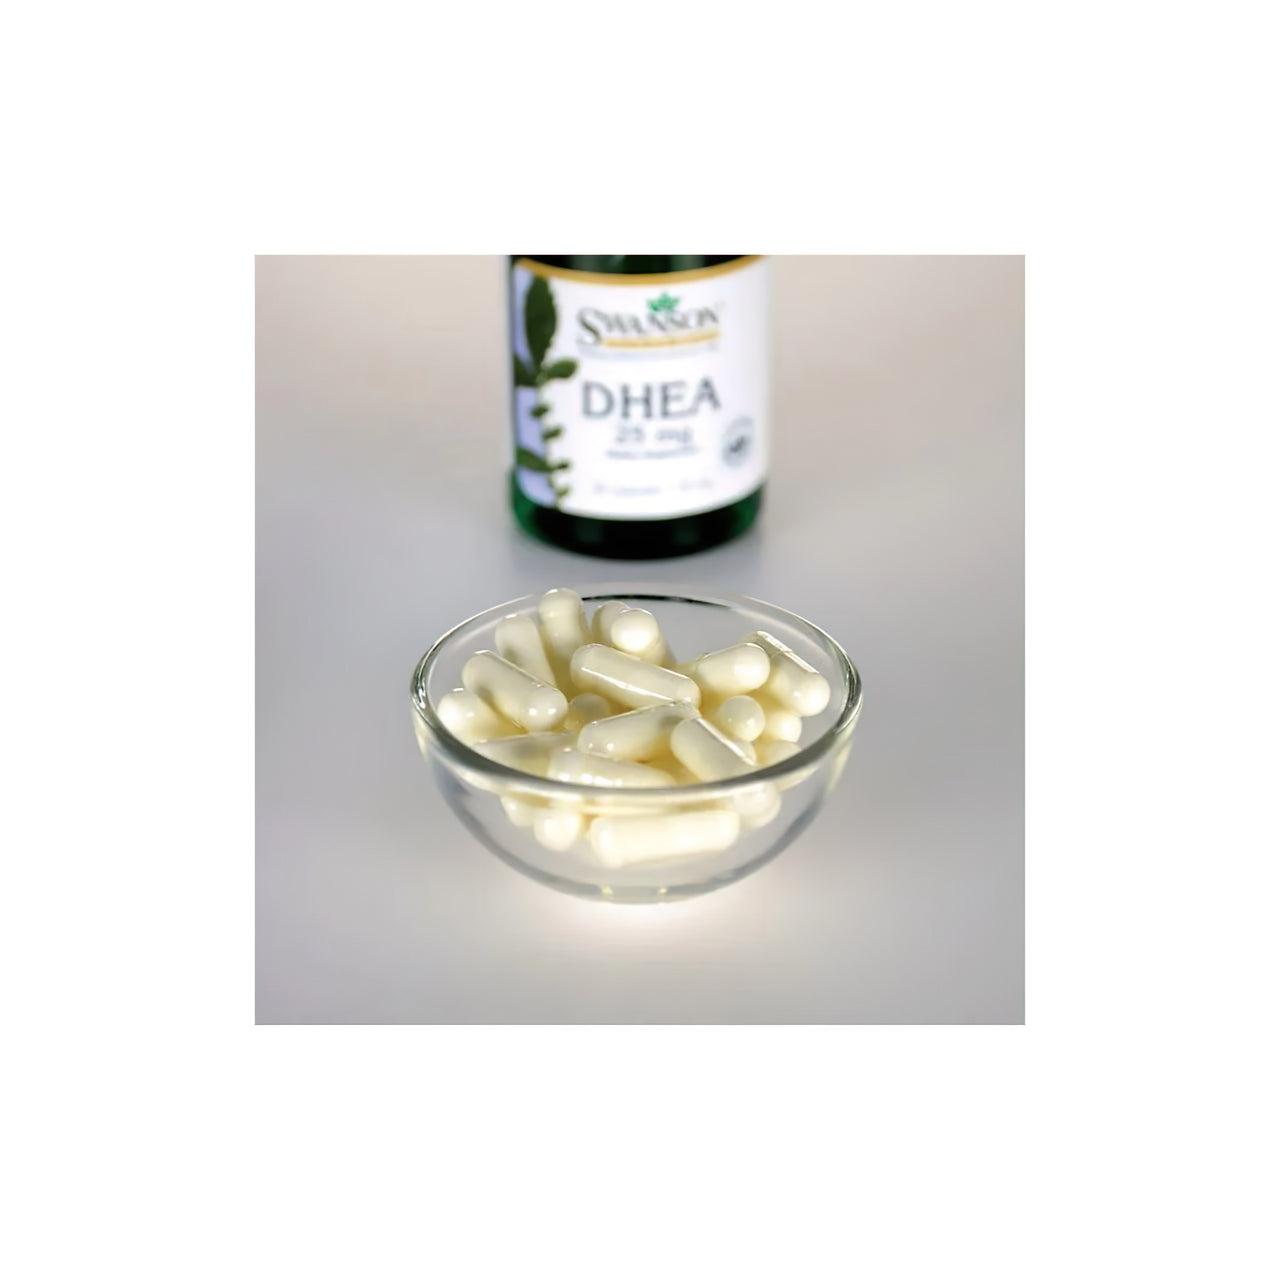 A bottle of Swanson DHEA 25 mg 30 Capsules supplement for hormonal balance with a bowl of capsules in the foreground.